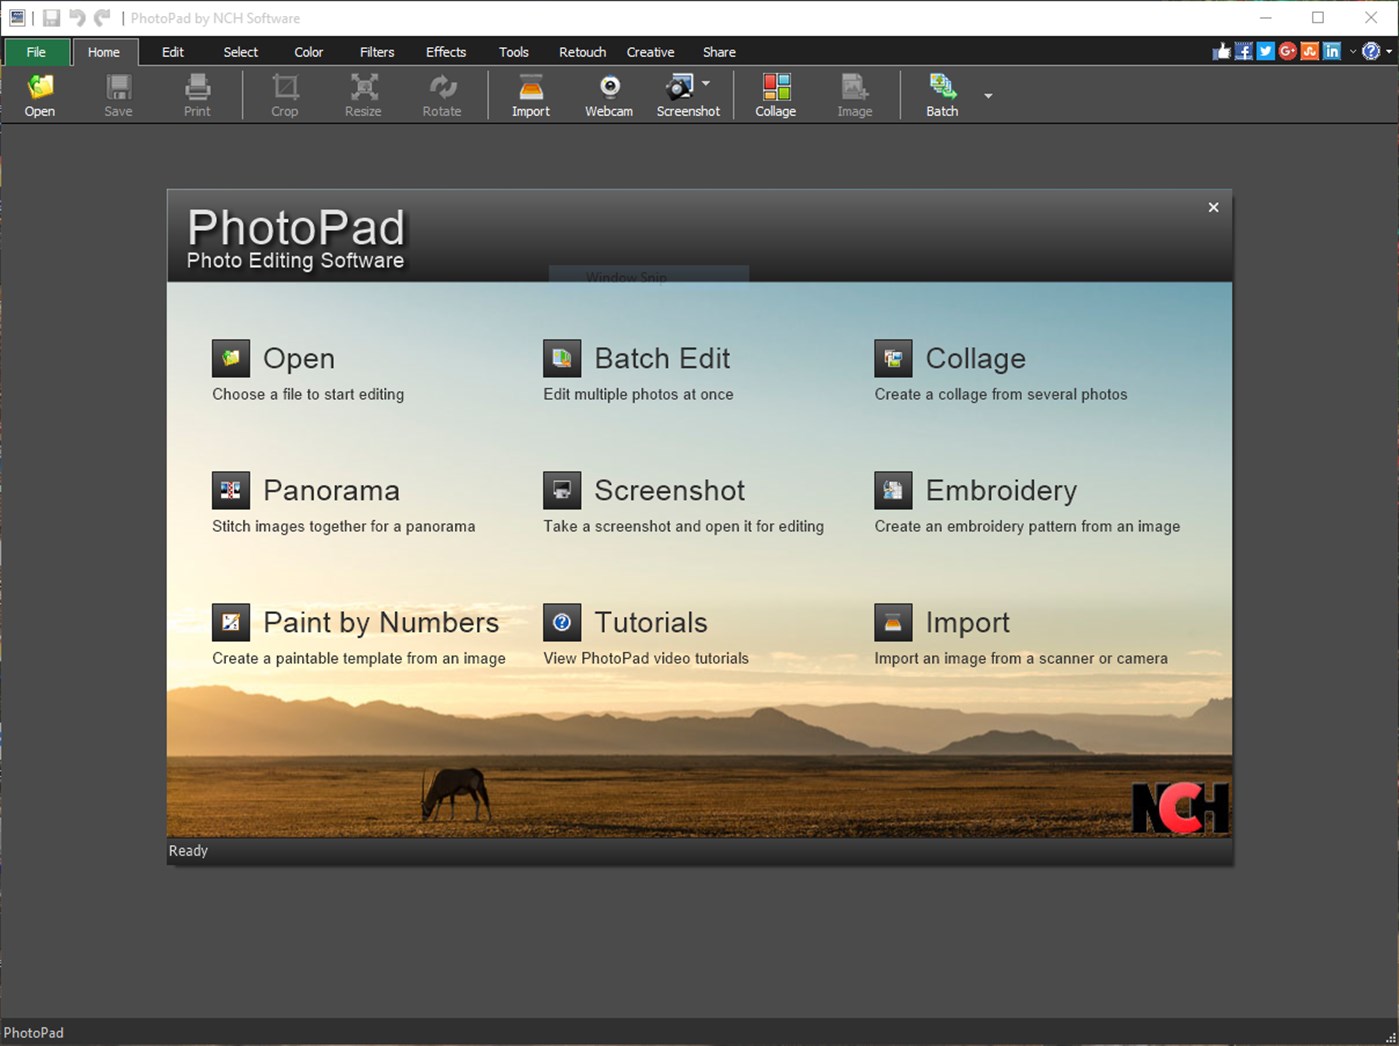 instal the new for windows NCH PhotoPad Image Editor 11.47